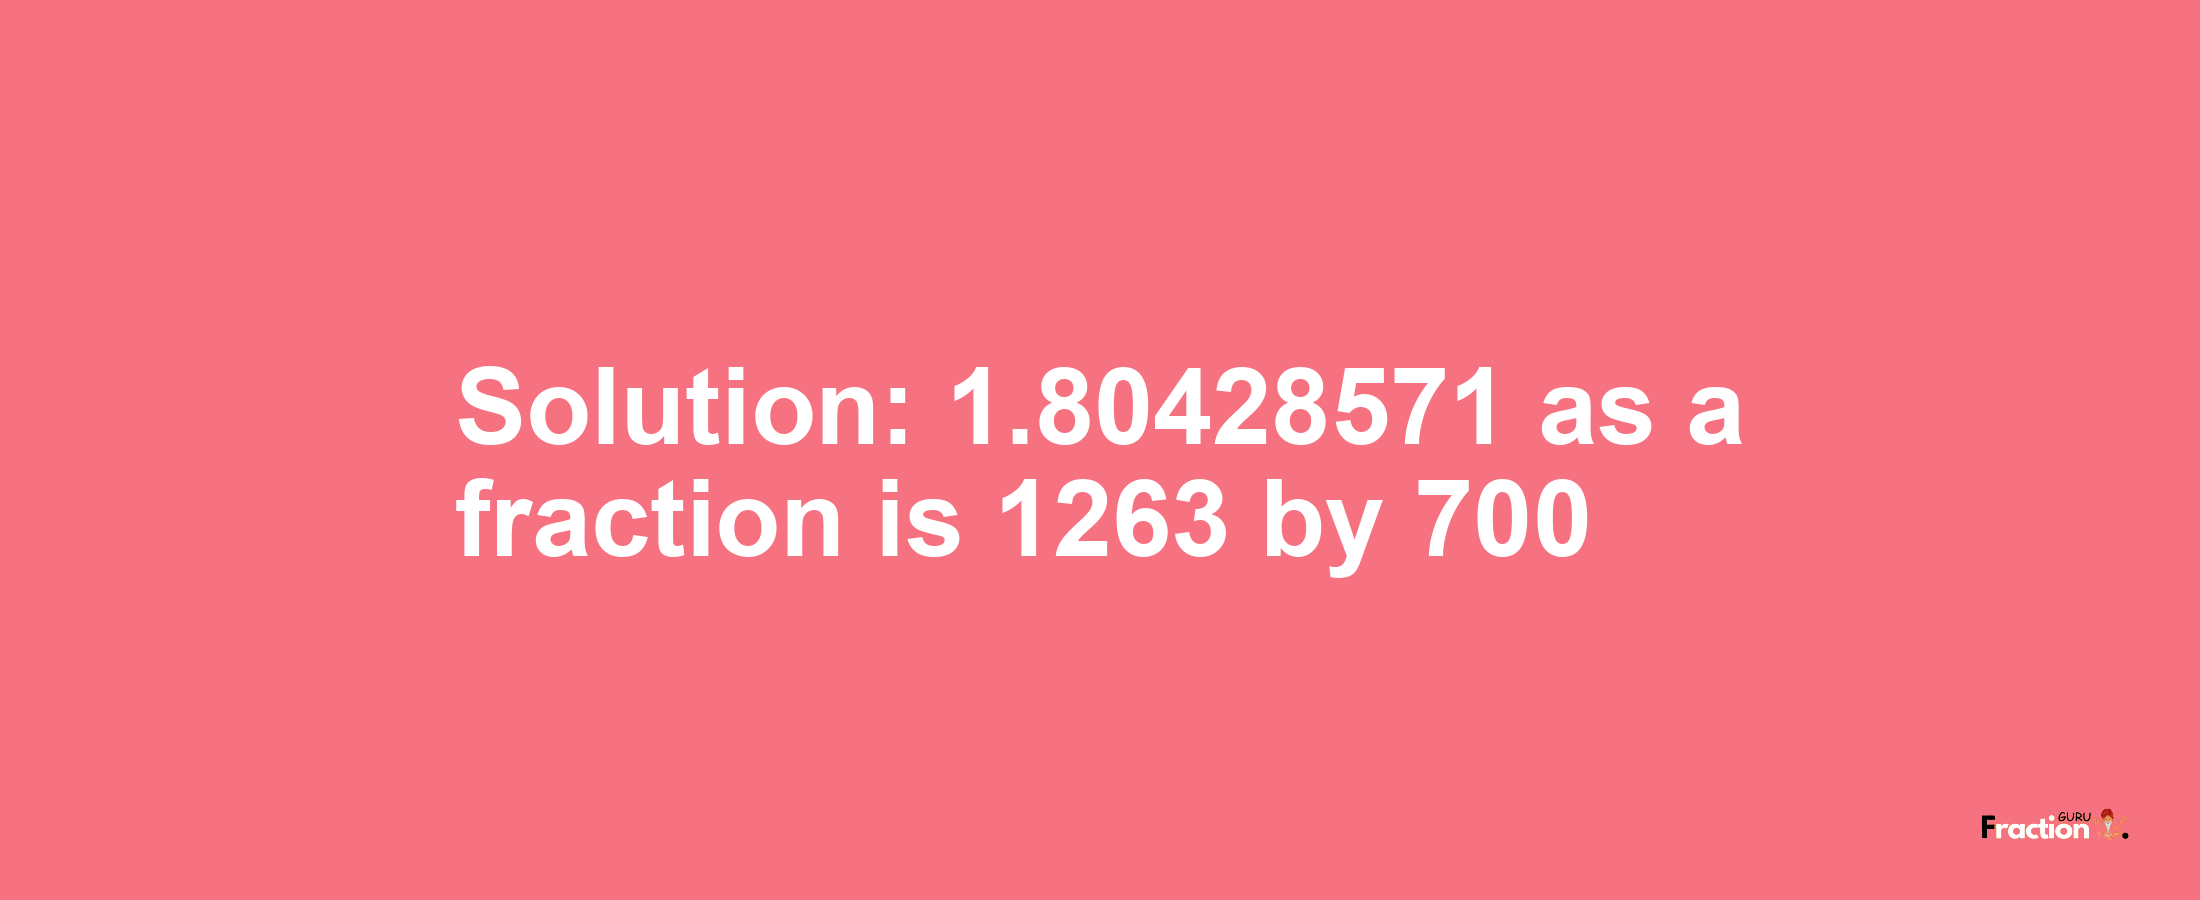 Solution:1.80428571 as a fraction is 1263/700